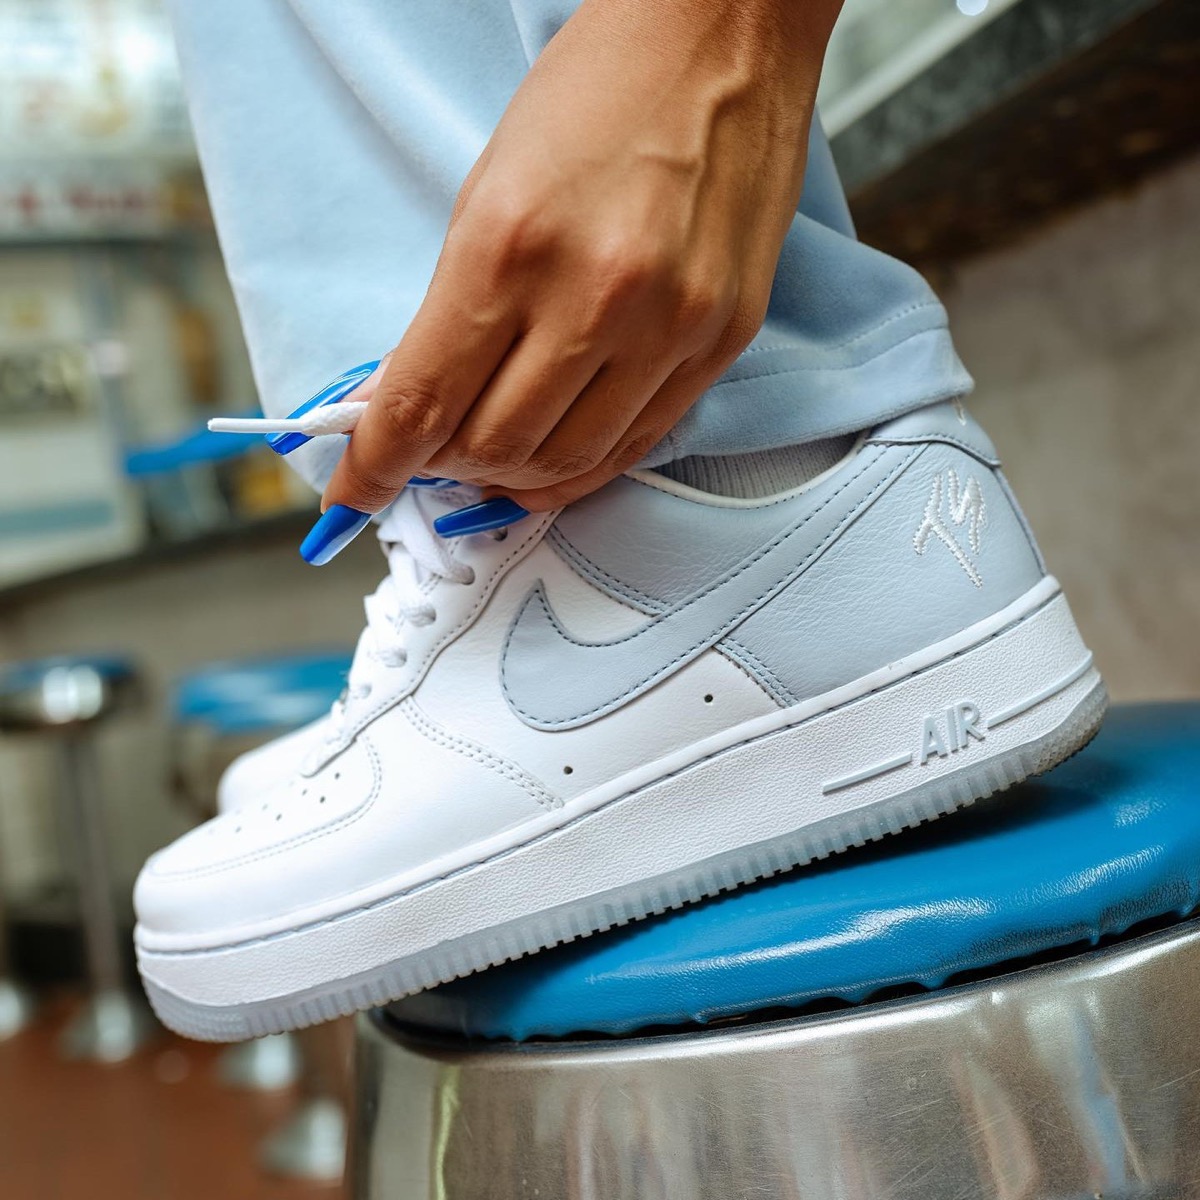 Terror Squad × Nike Air Force 1 Low QS靴